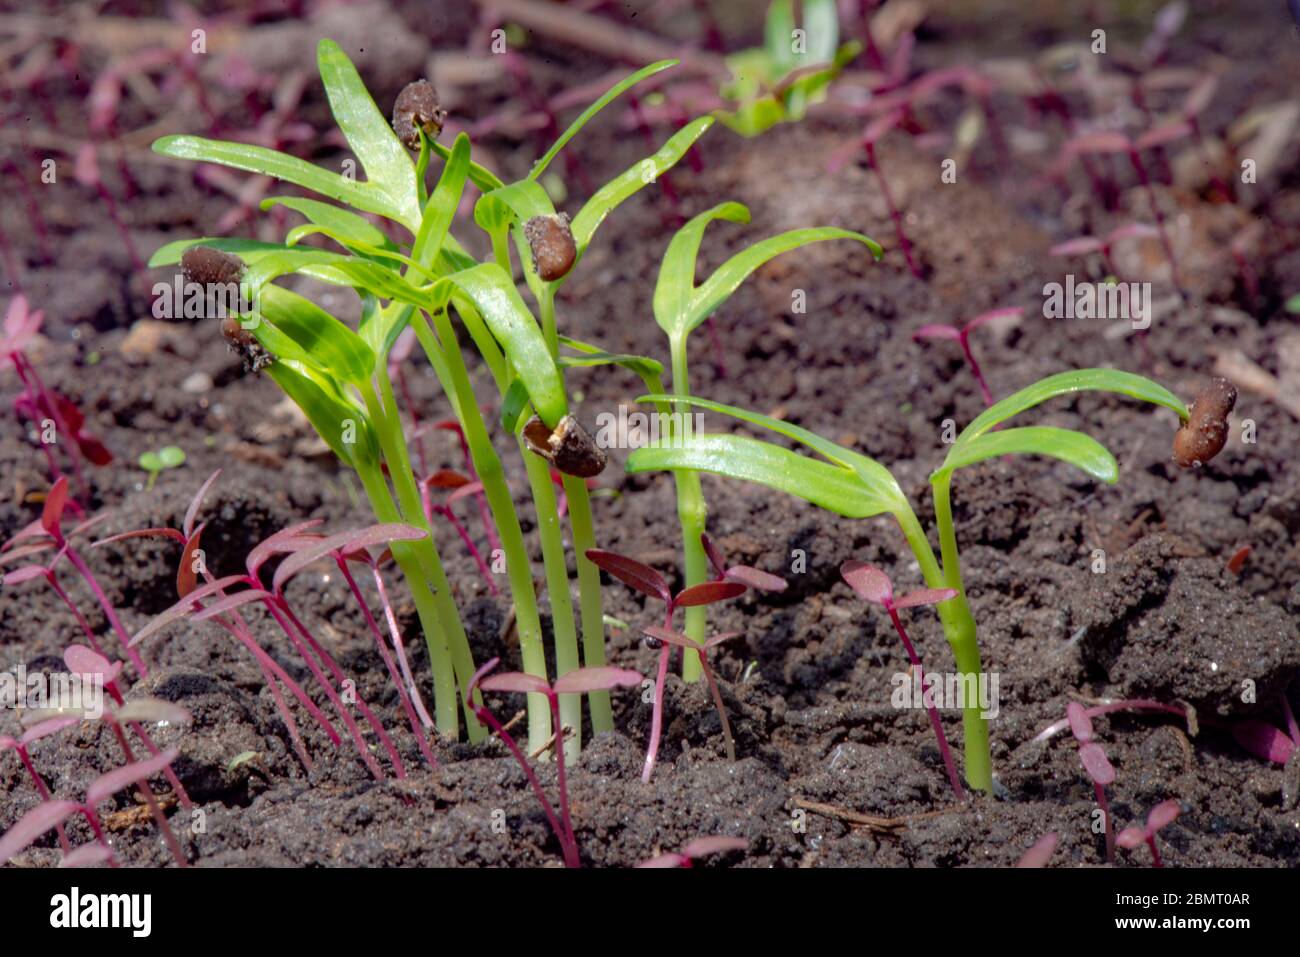 Agriculture art Stock Photo